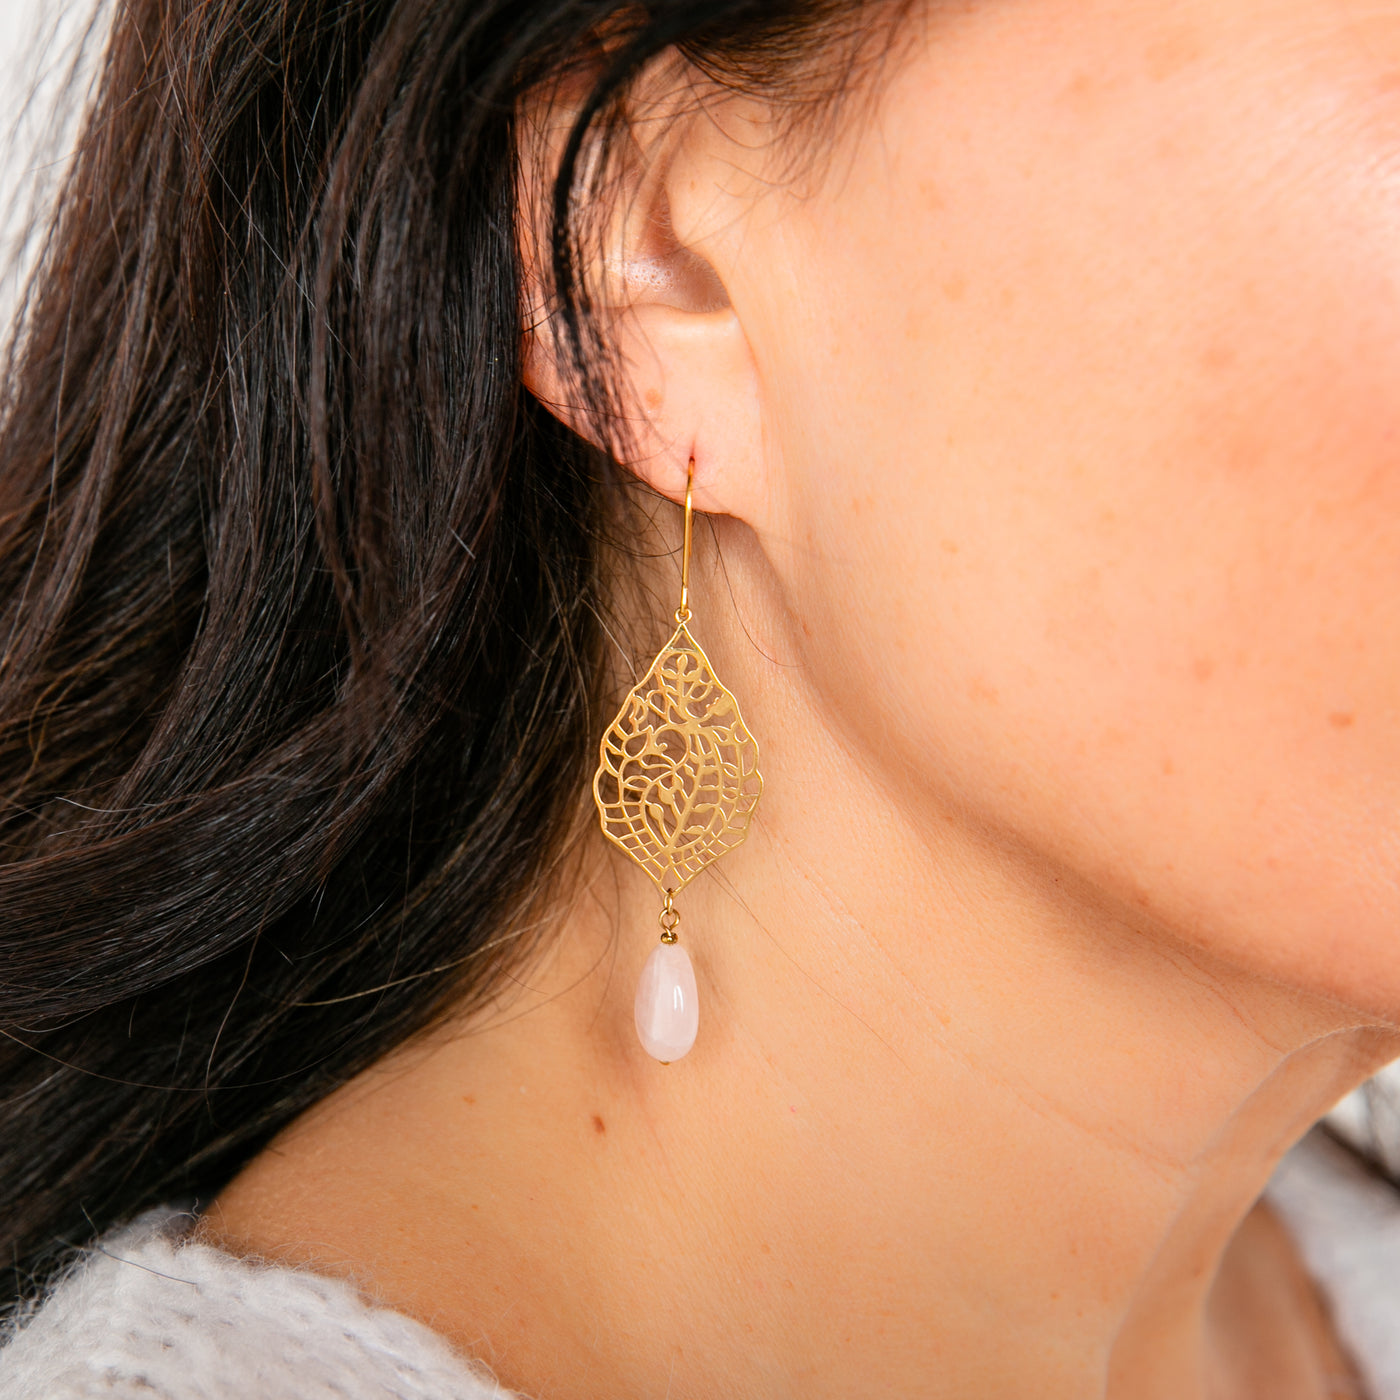 The Bonnie Earrings in pink in a beautiful teardrop shape with leaf and flower detailing